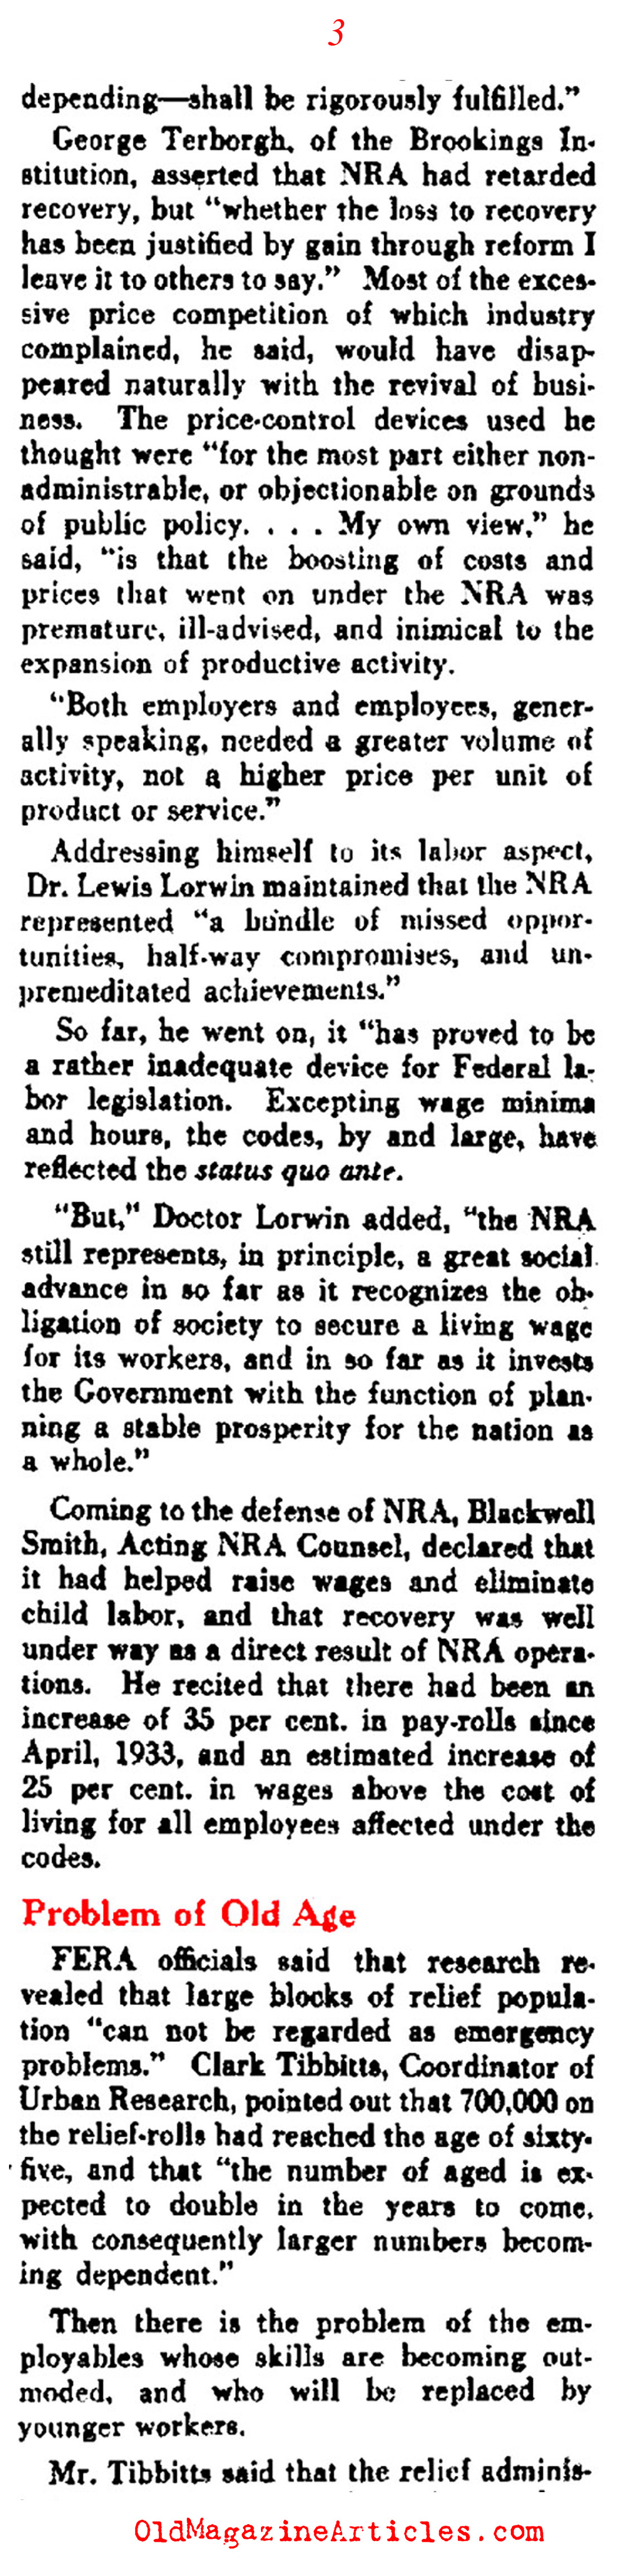 The Forgotten Men and the NRA (Literary Digest, 1935)